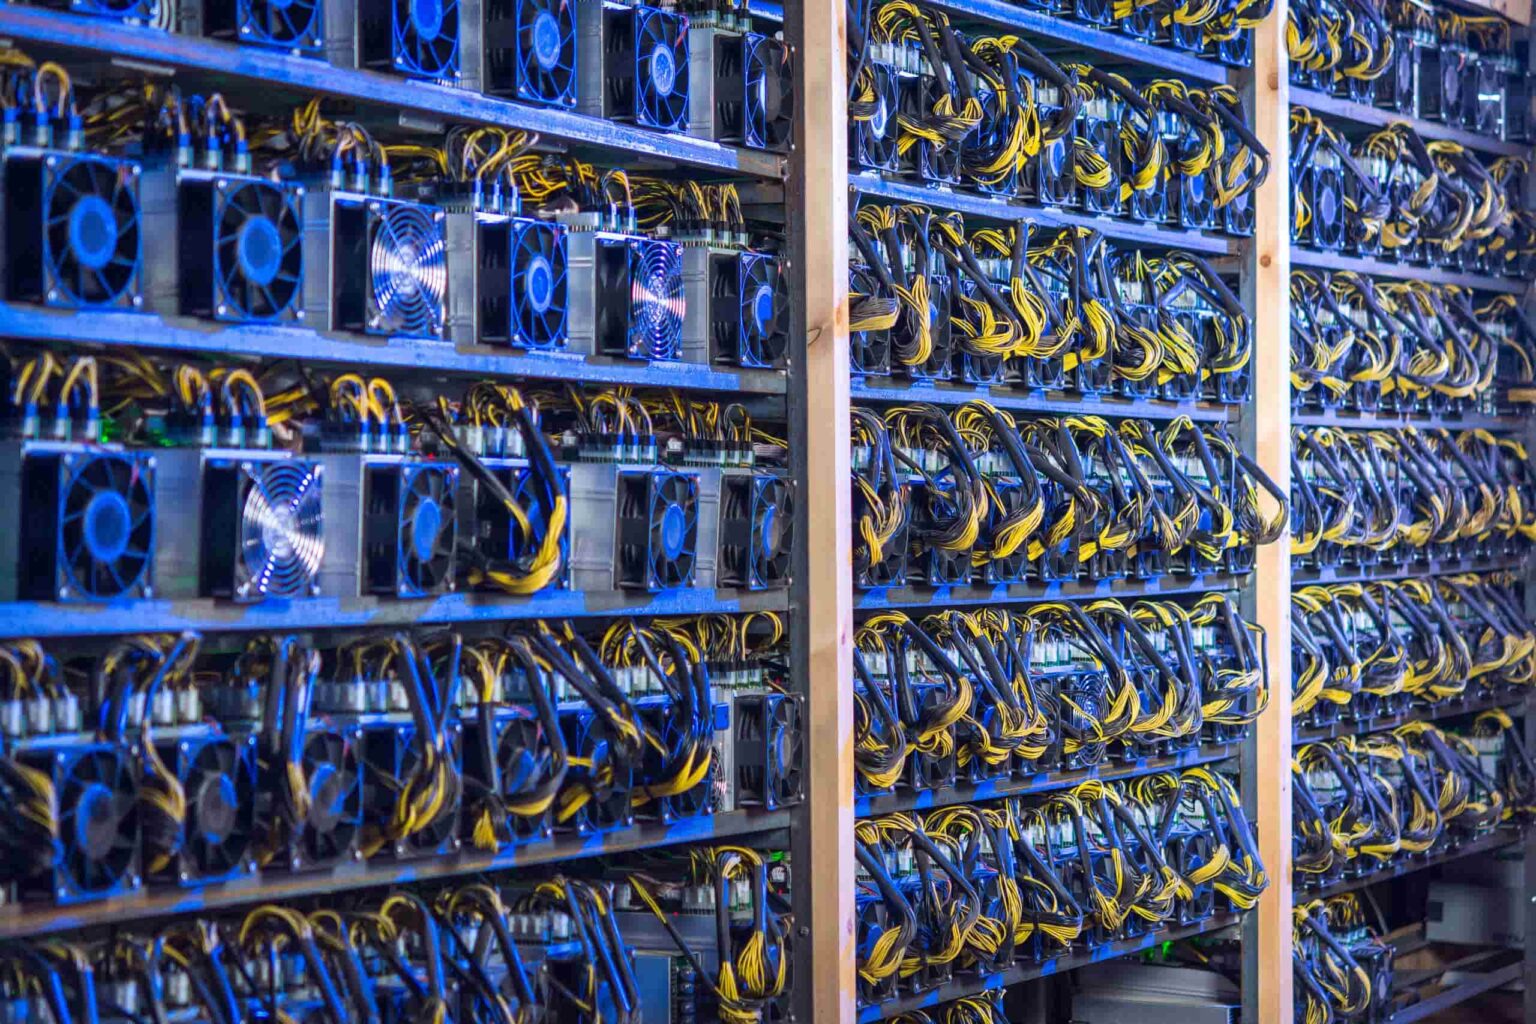 If you want to make money investing in cryptocurrency, you need to know how to calculate your mining fee. Get an inside scoop on the process right here.